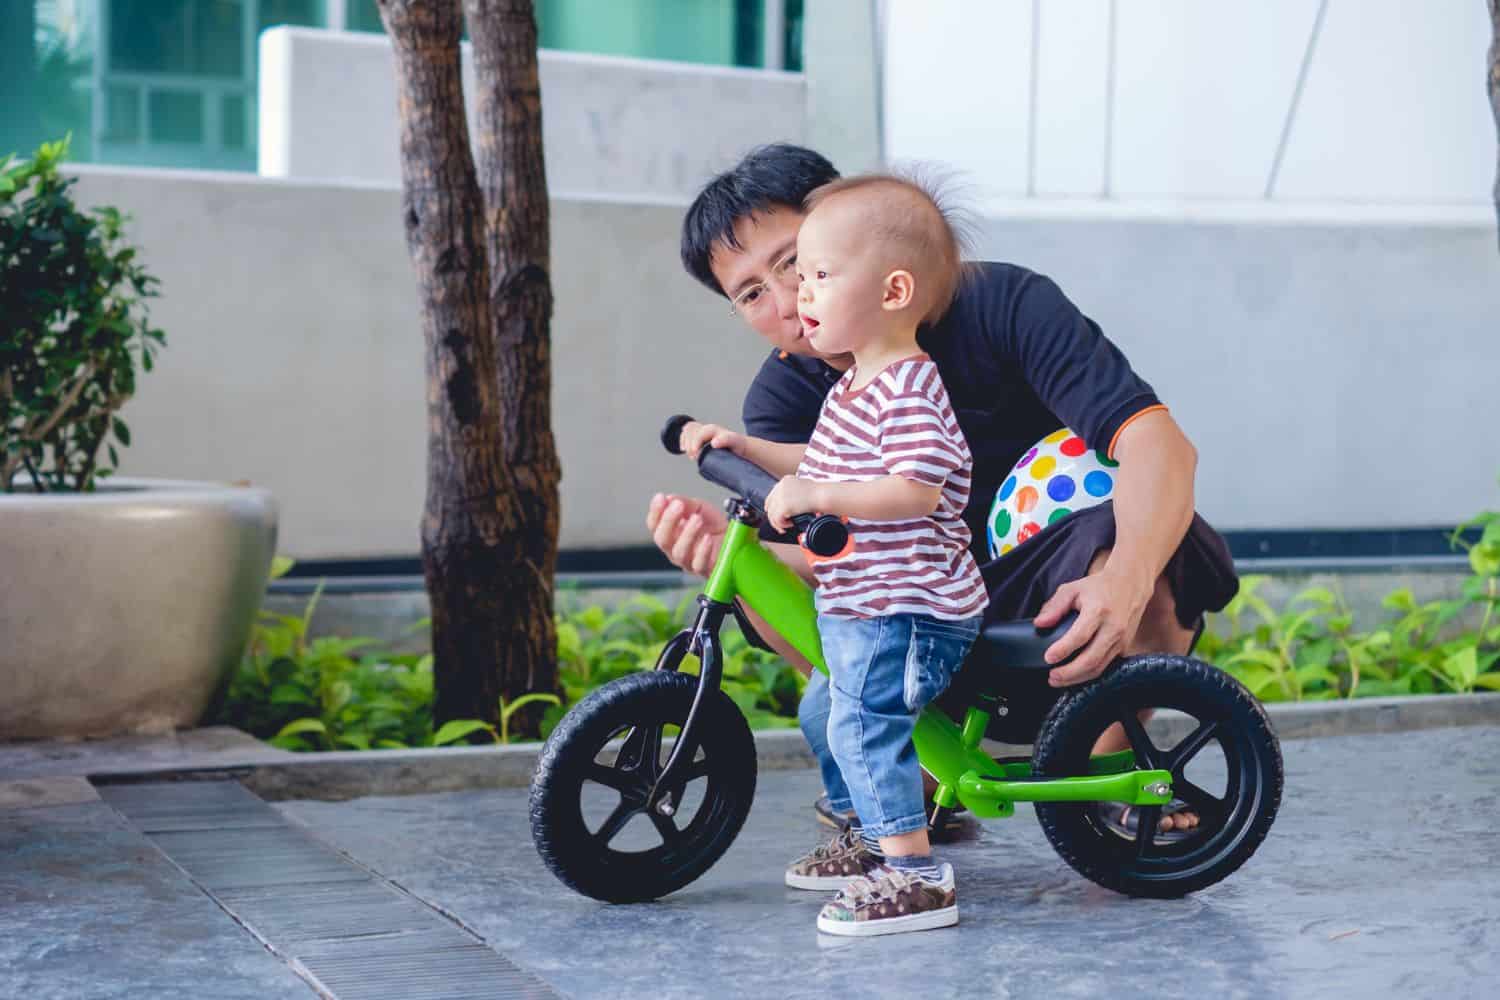 is-it-better-to-start-with-a-balance-bike-arnienicola